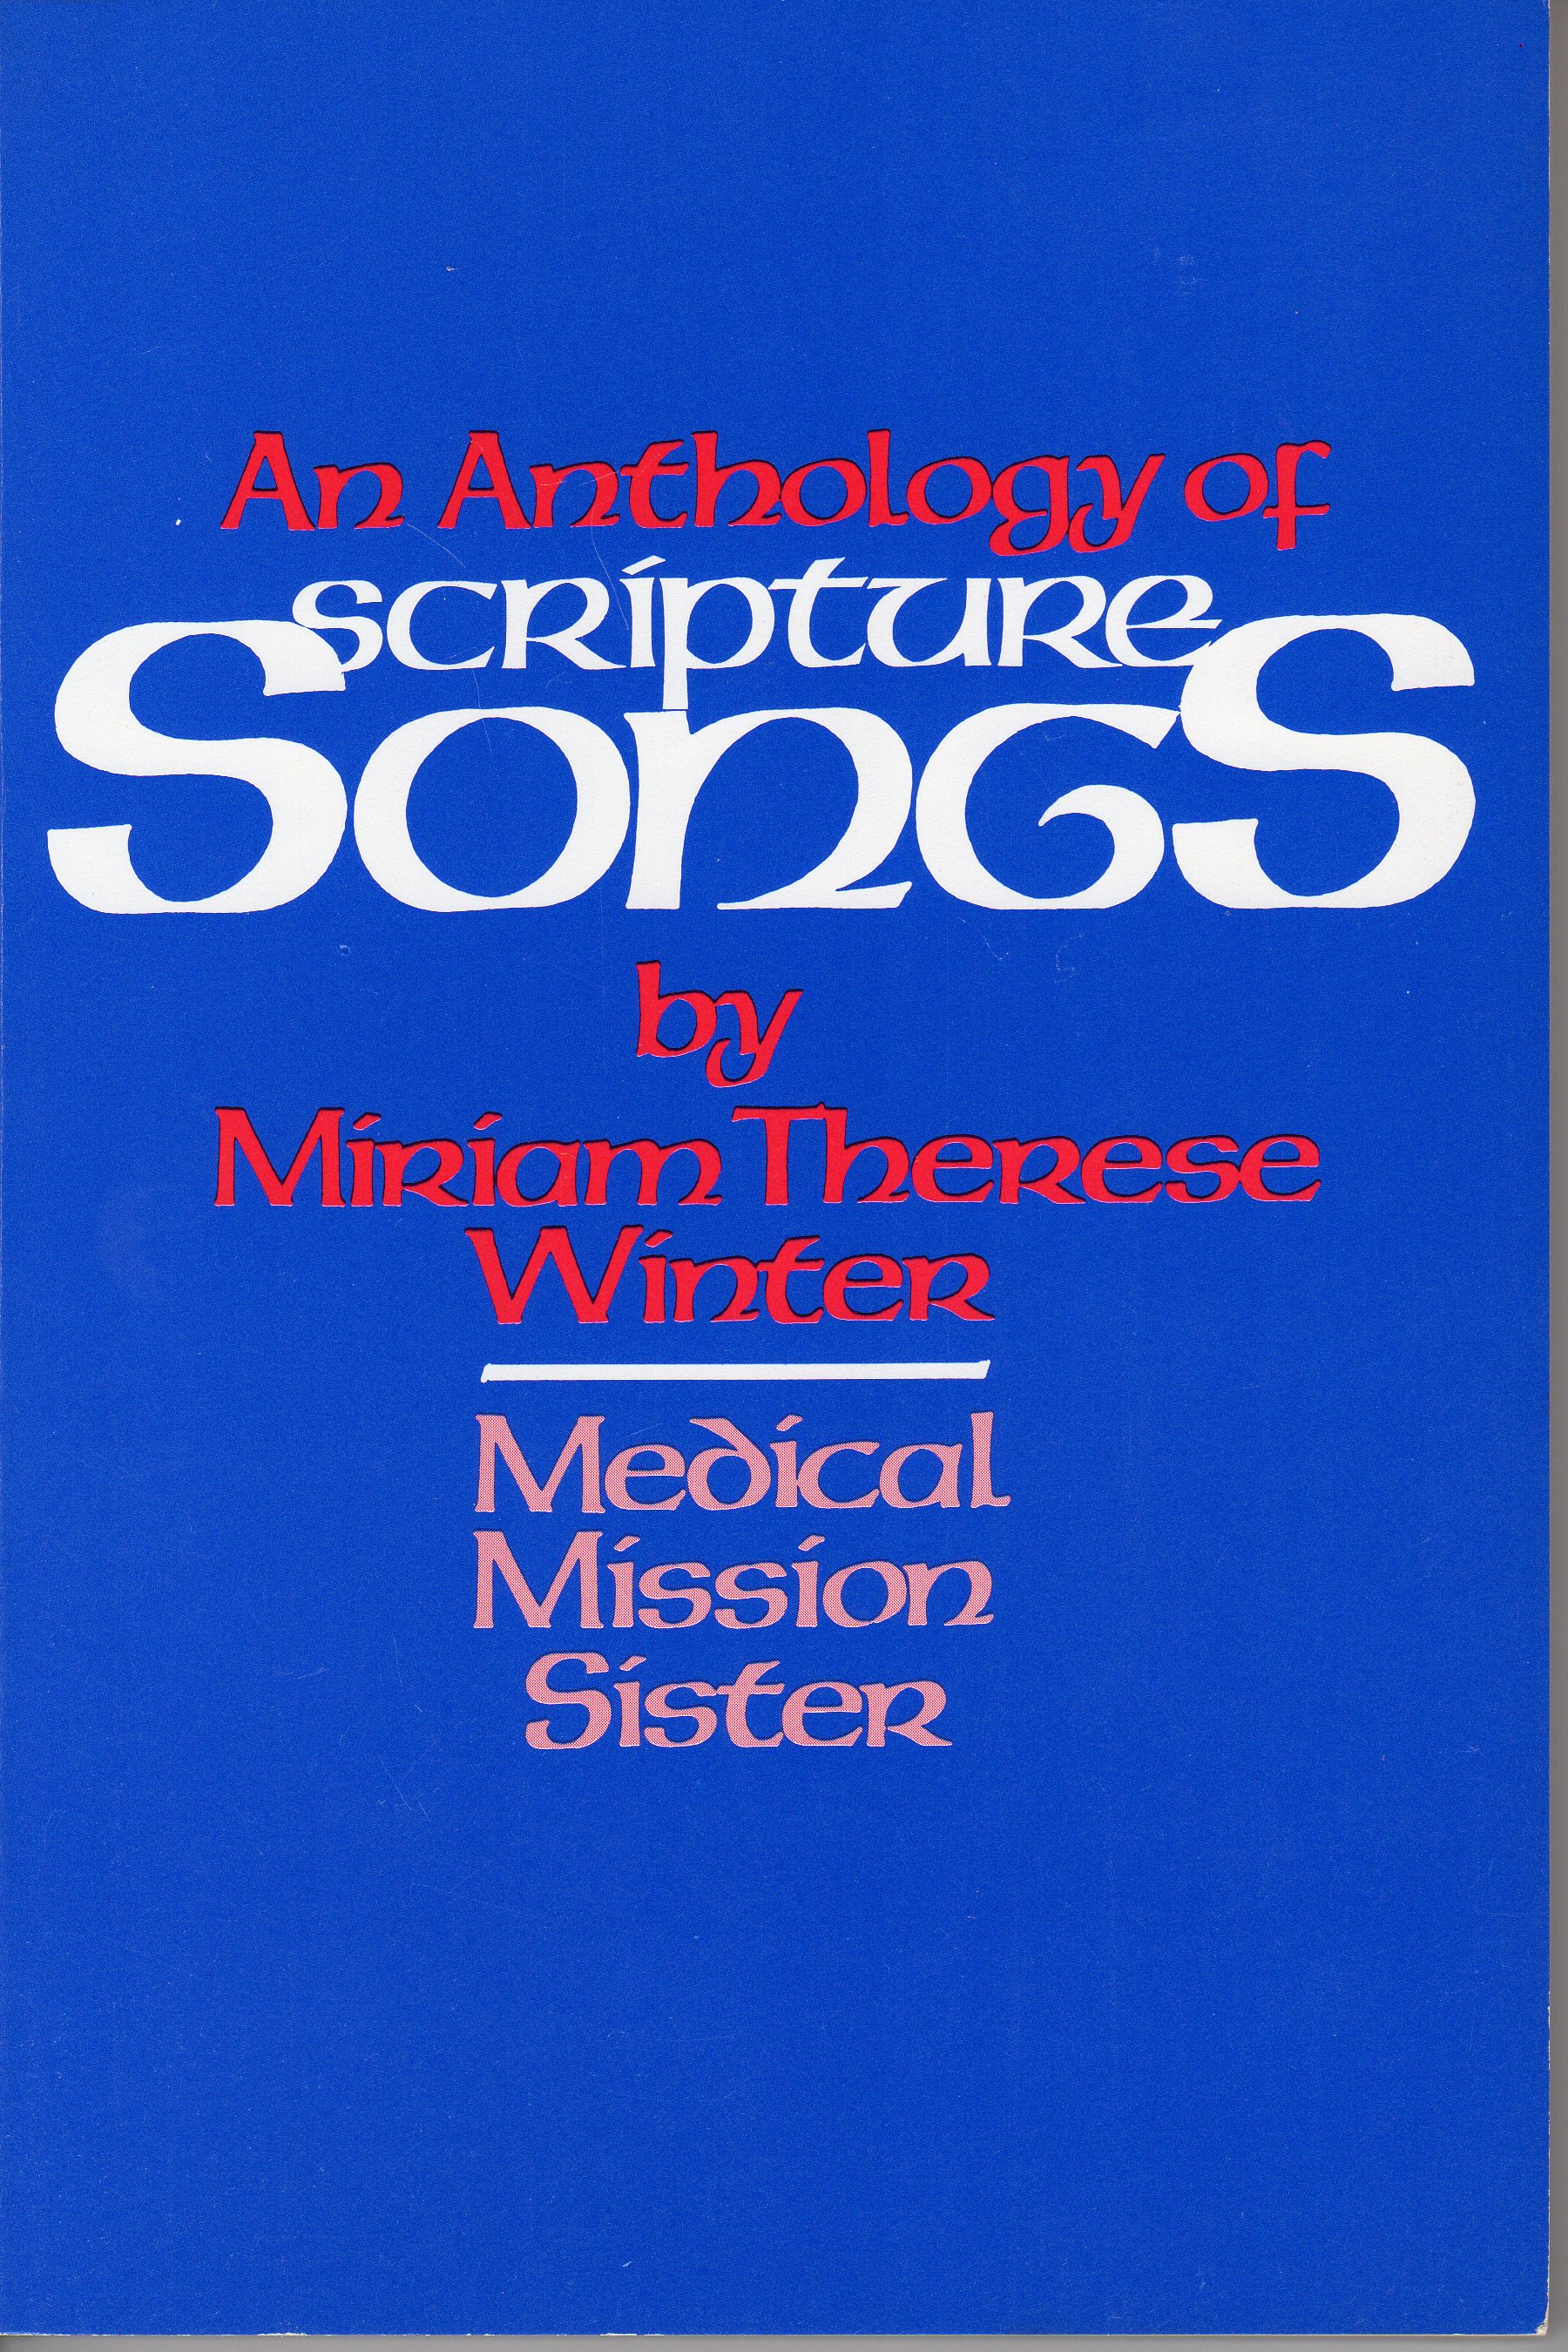 An Anthology of Scripture Songs